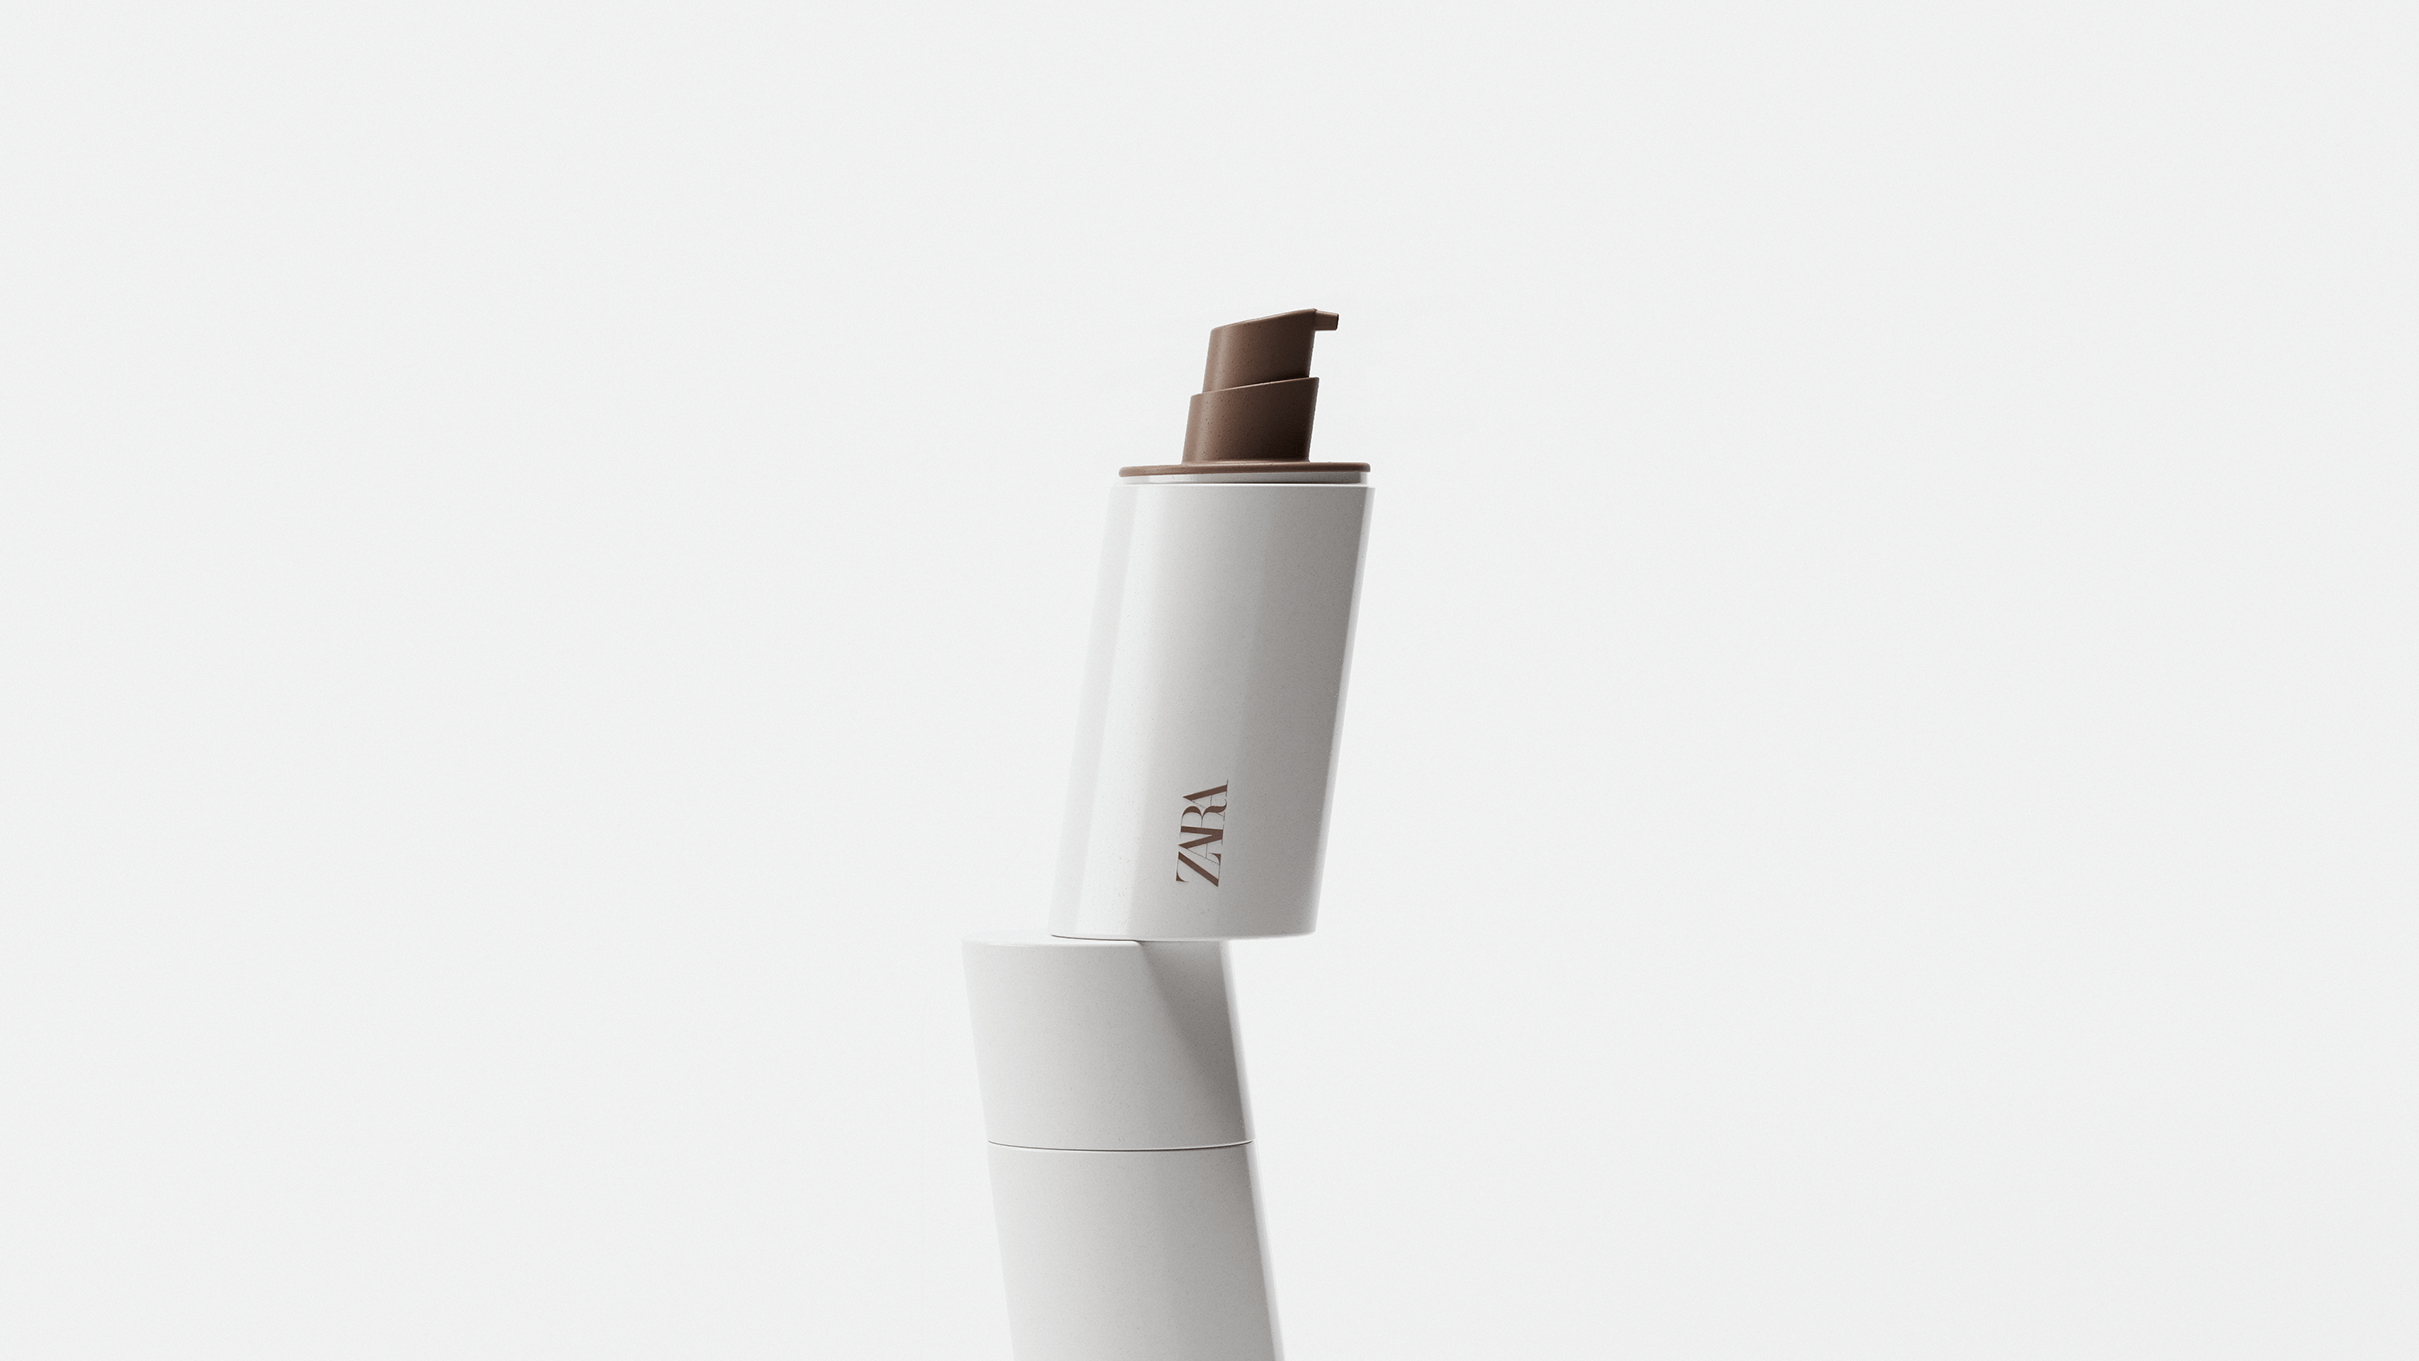 ZARA SKIN: More Sustainable and Refillable Packaging Design